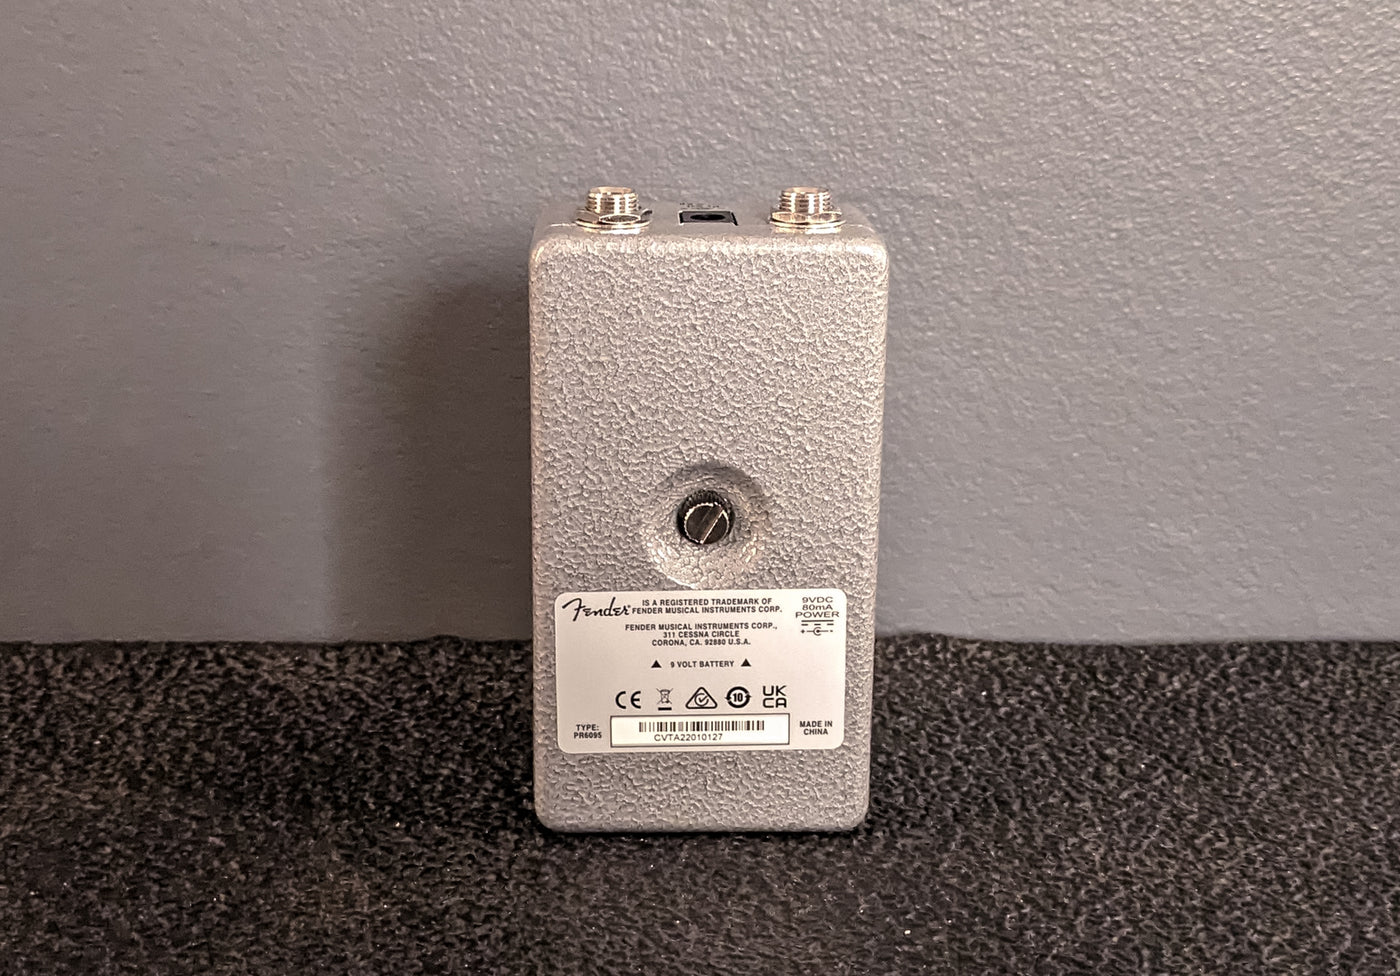 USED Hammertone Overdrive, Recent